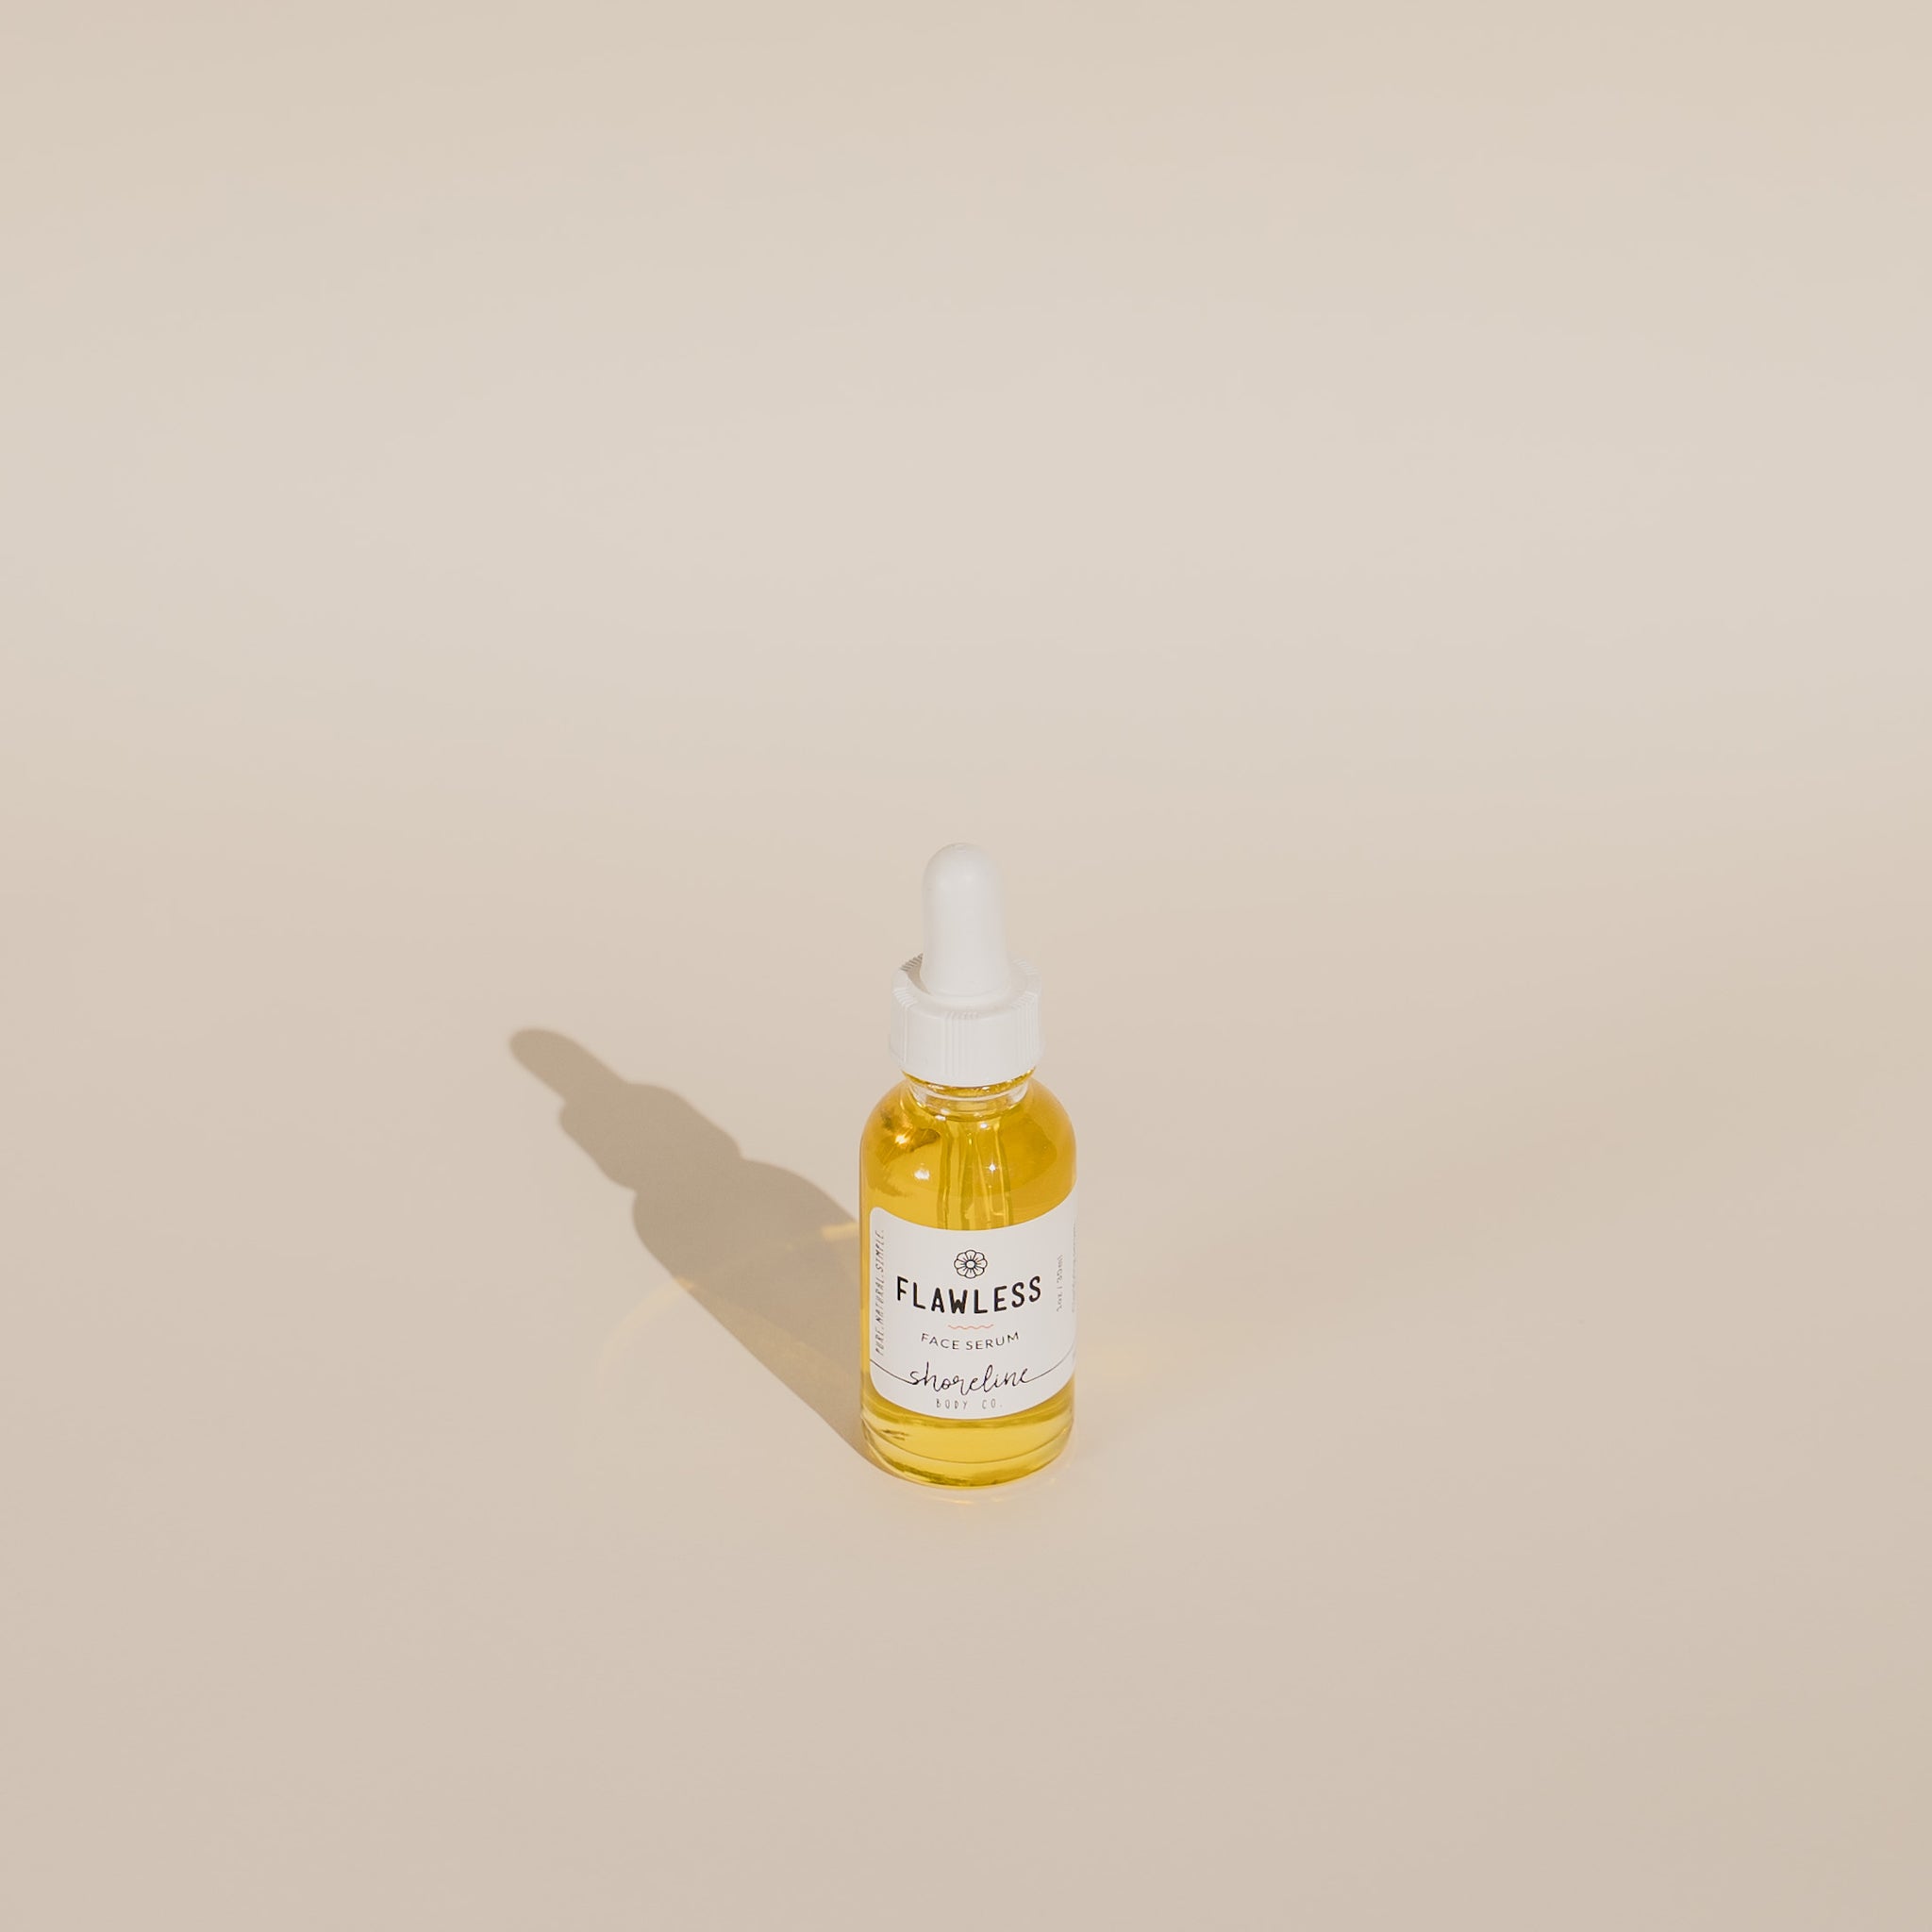 The Flawless Face Serum is pictured against a white background. 